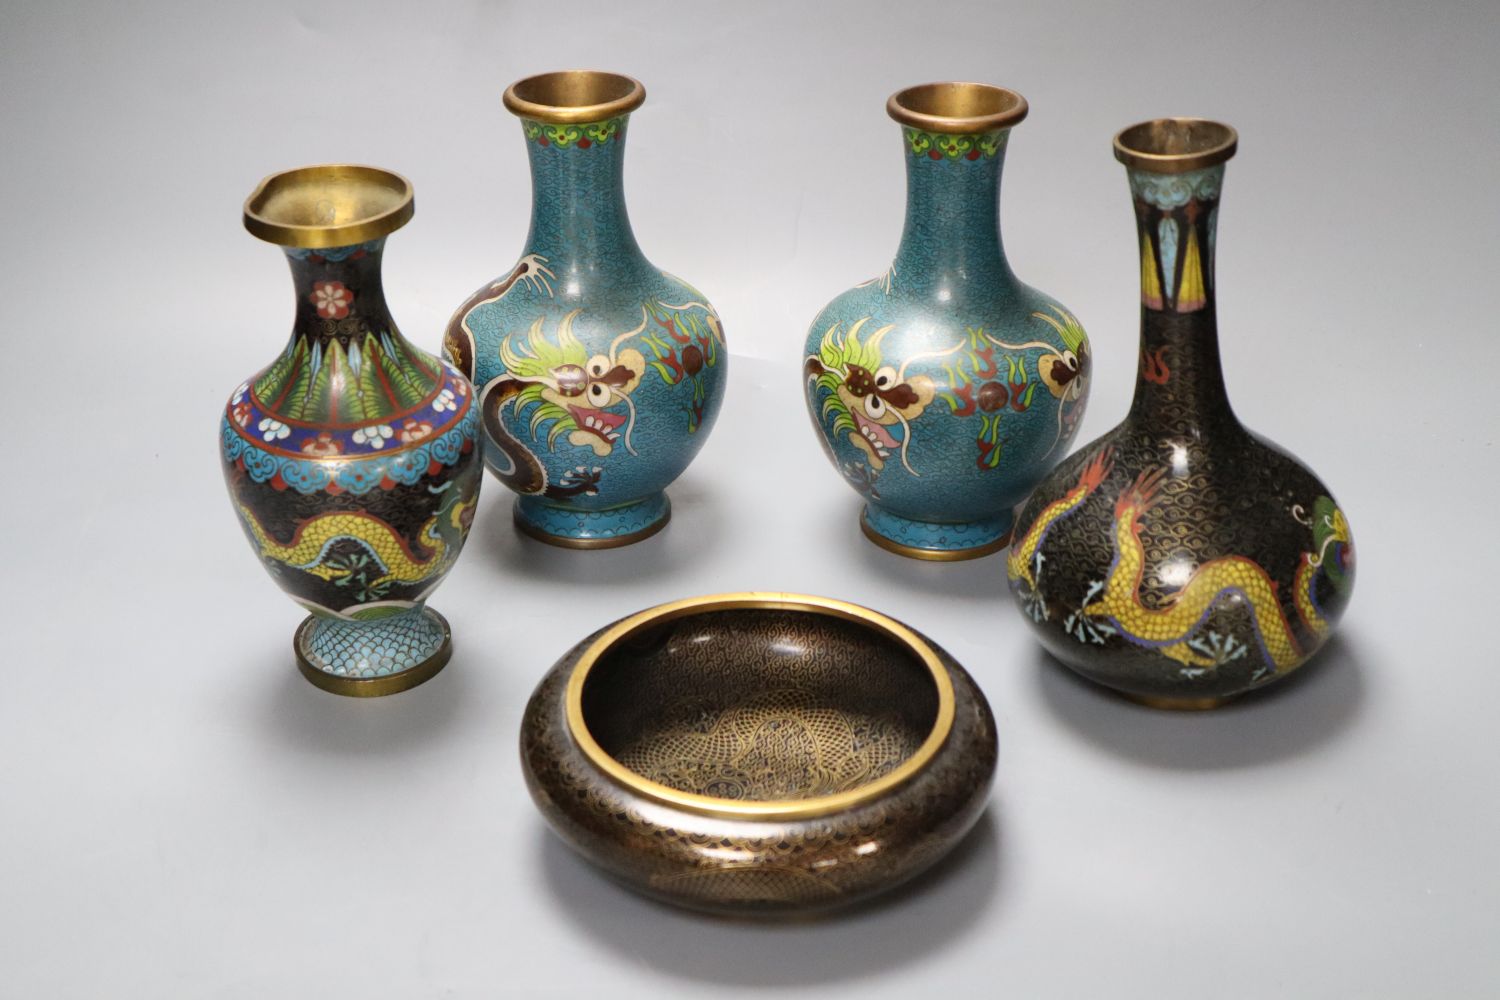 A pair of Chinese cloisonne enamel vases, 17cm and three other cloisonne vessels